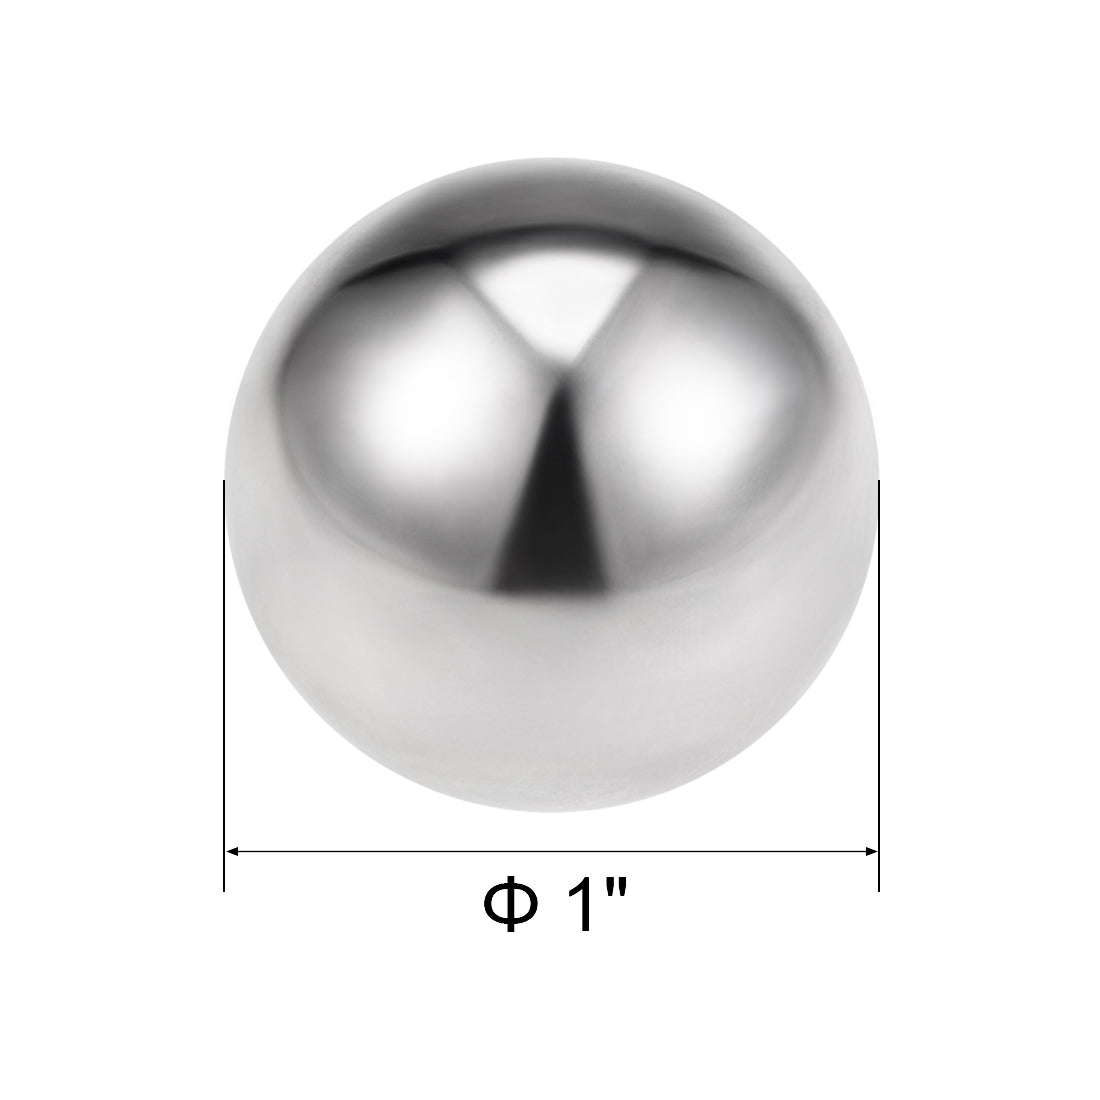 Uxcell Uxcell 1" Bearing Balls 440C Stainless Steel G25 Precision Balls